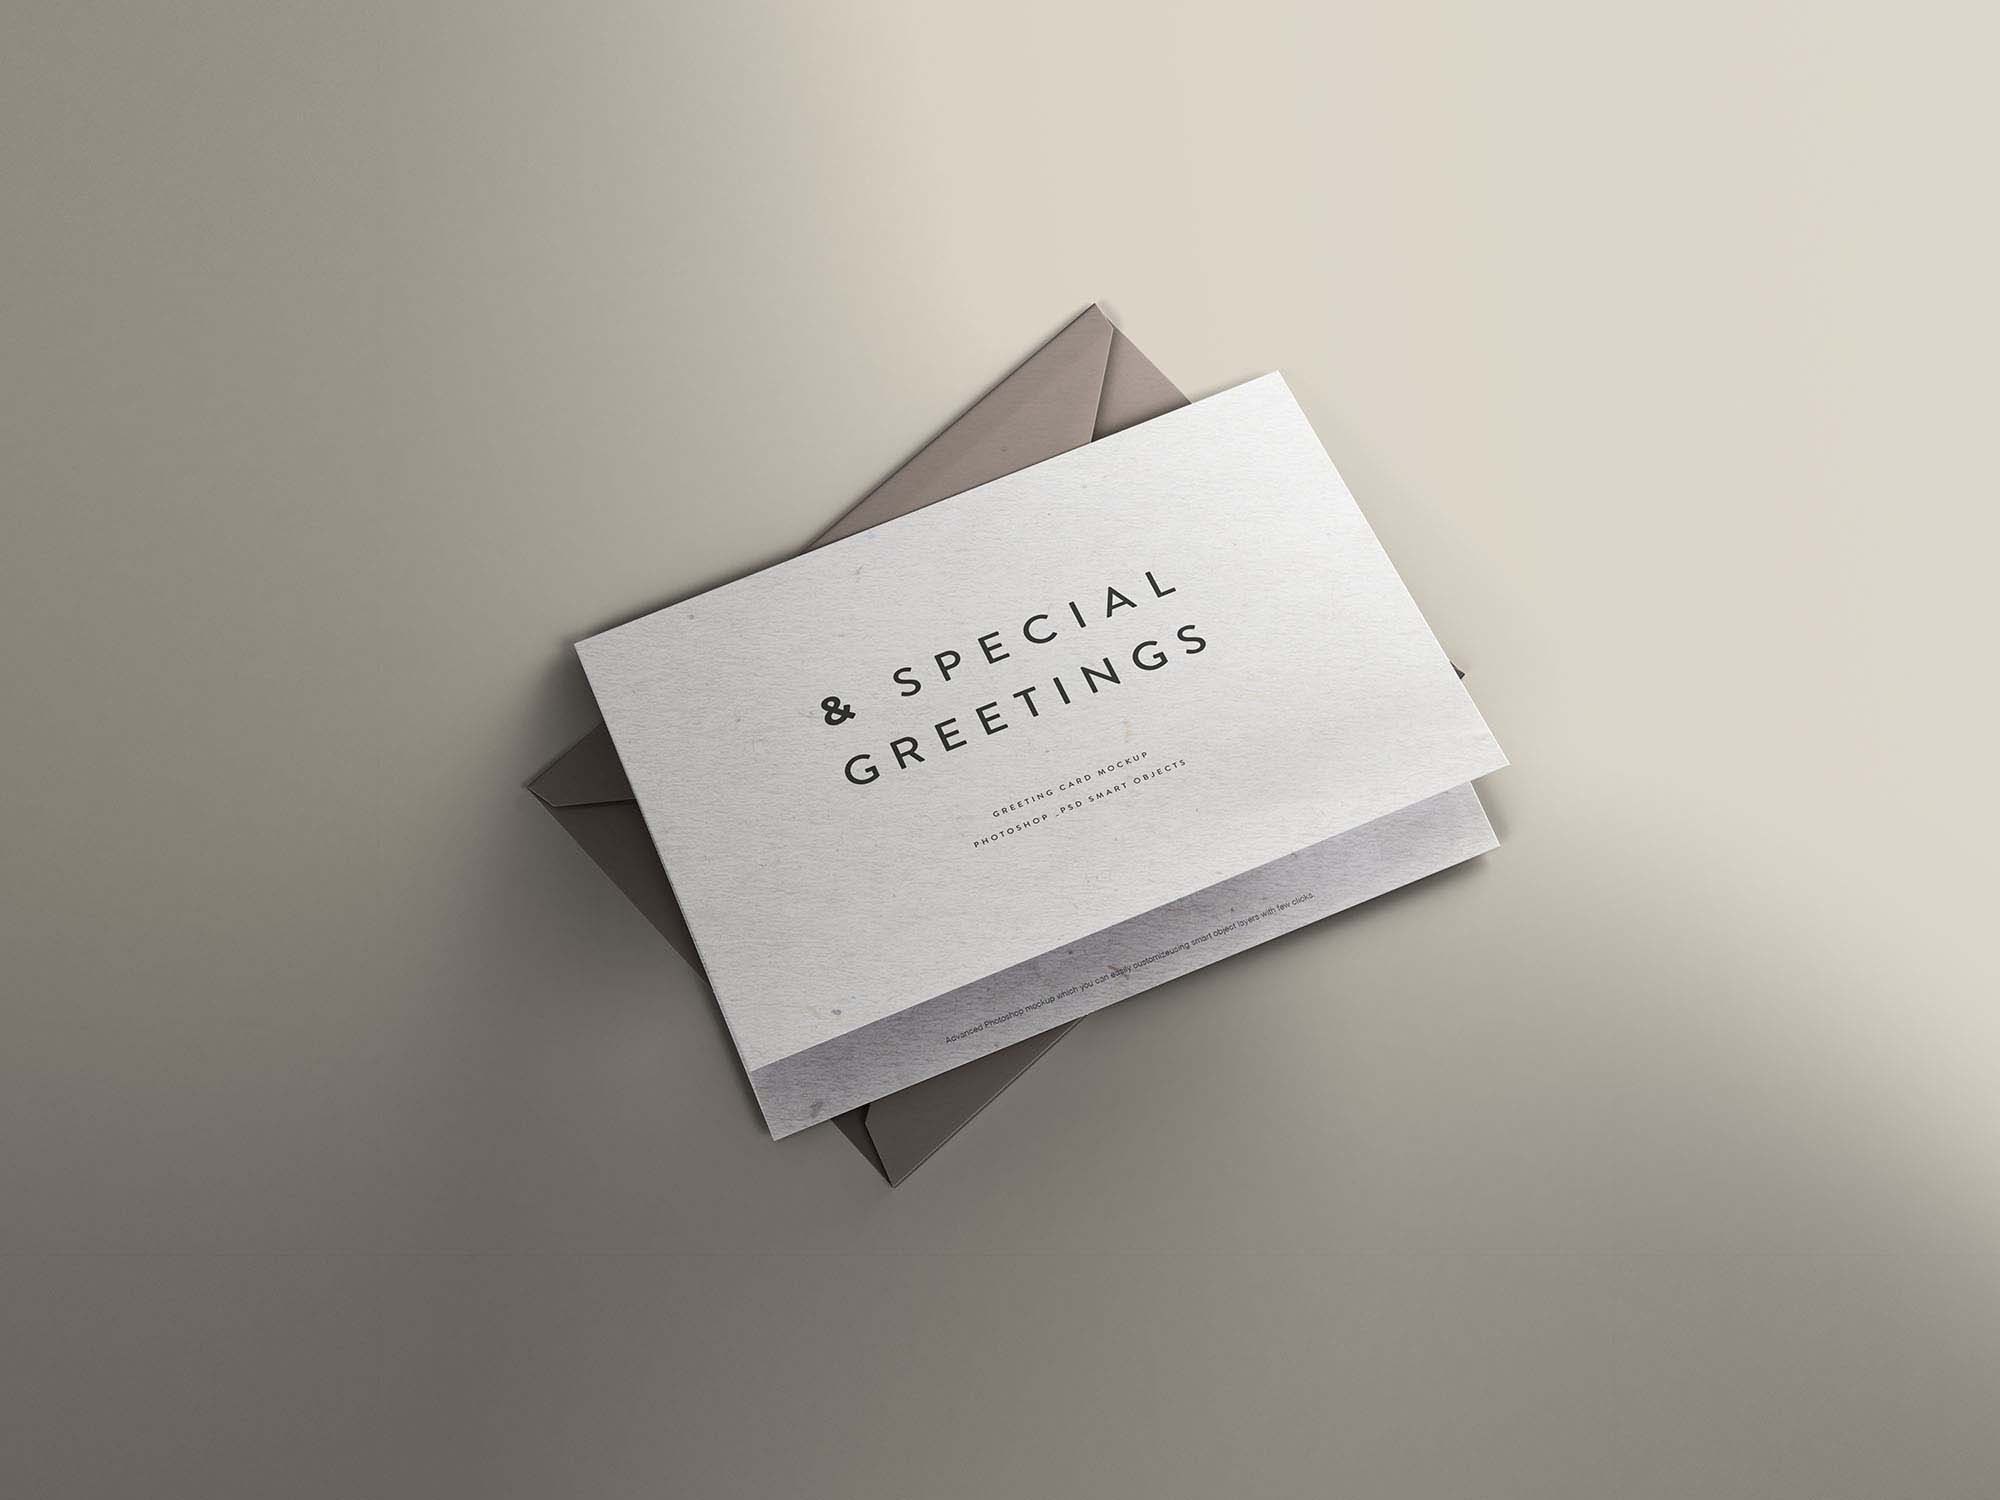 Download Greeting Card Mockup With Envelope Cover Free Psd Psfiles